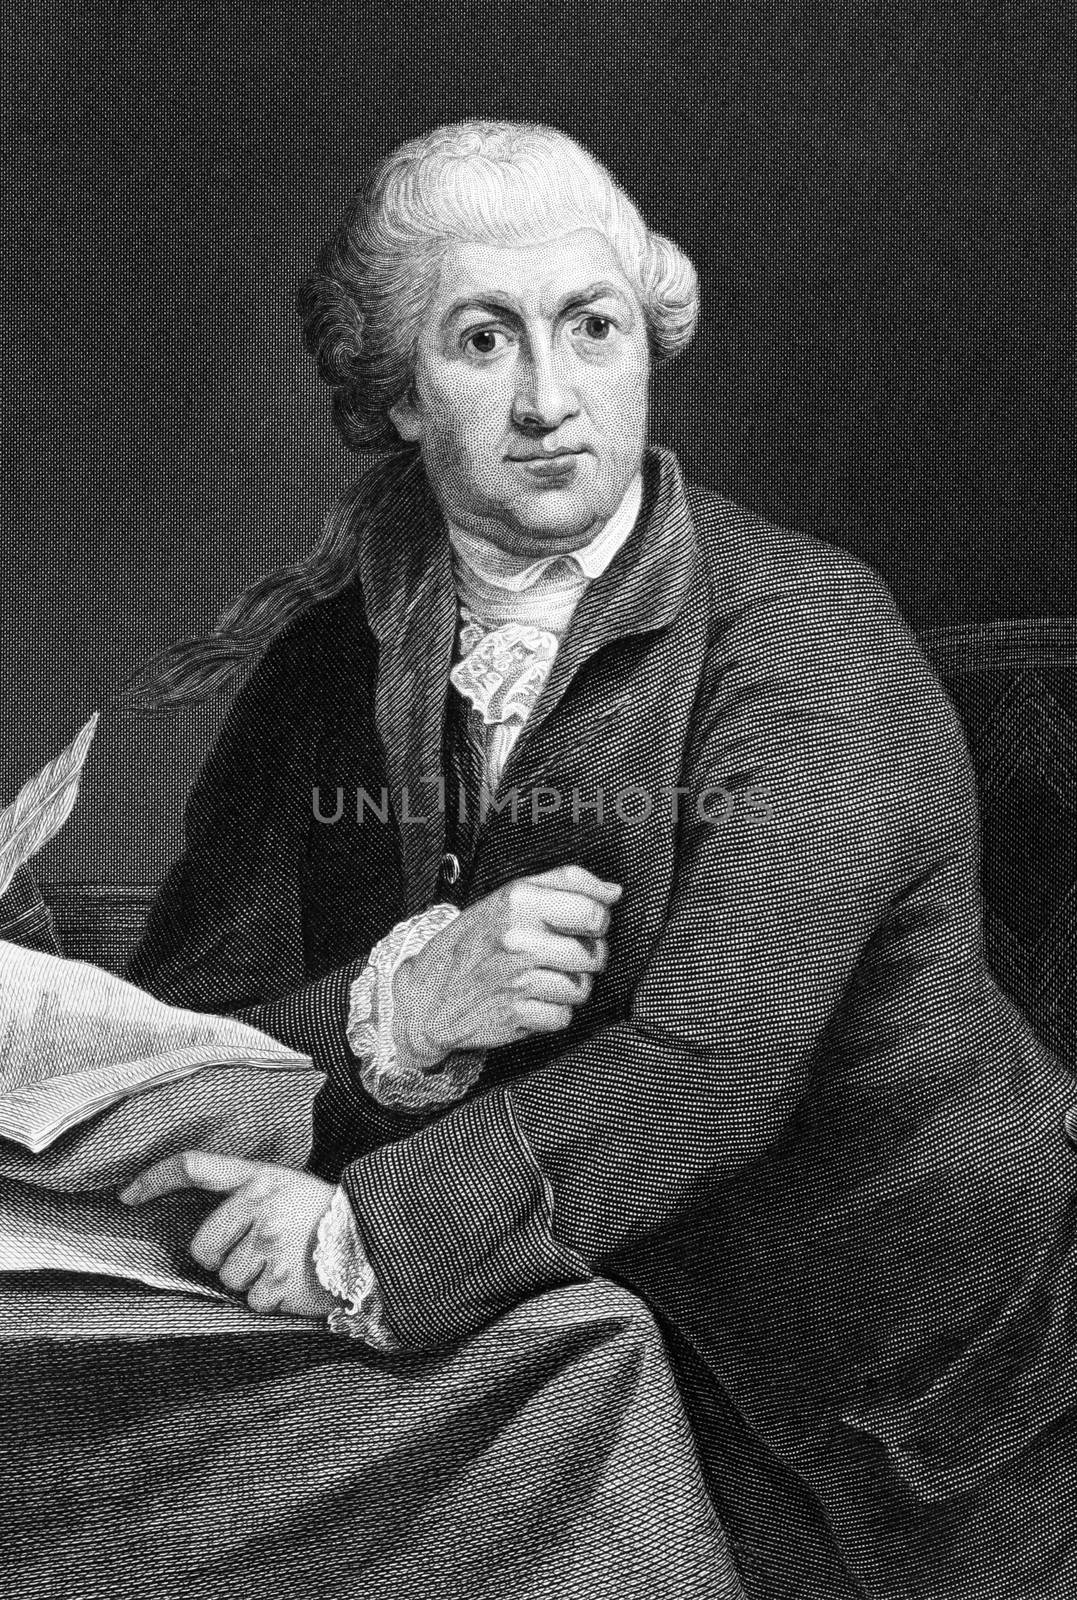 David Garrick (1717-1779) on engraving from 1873. English actor, playwright, theatre manager and producer. Engraved after a painting by Robert Edge Pine and published in "The Masterpiece Library of Short Stories'',USA,1873.